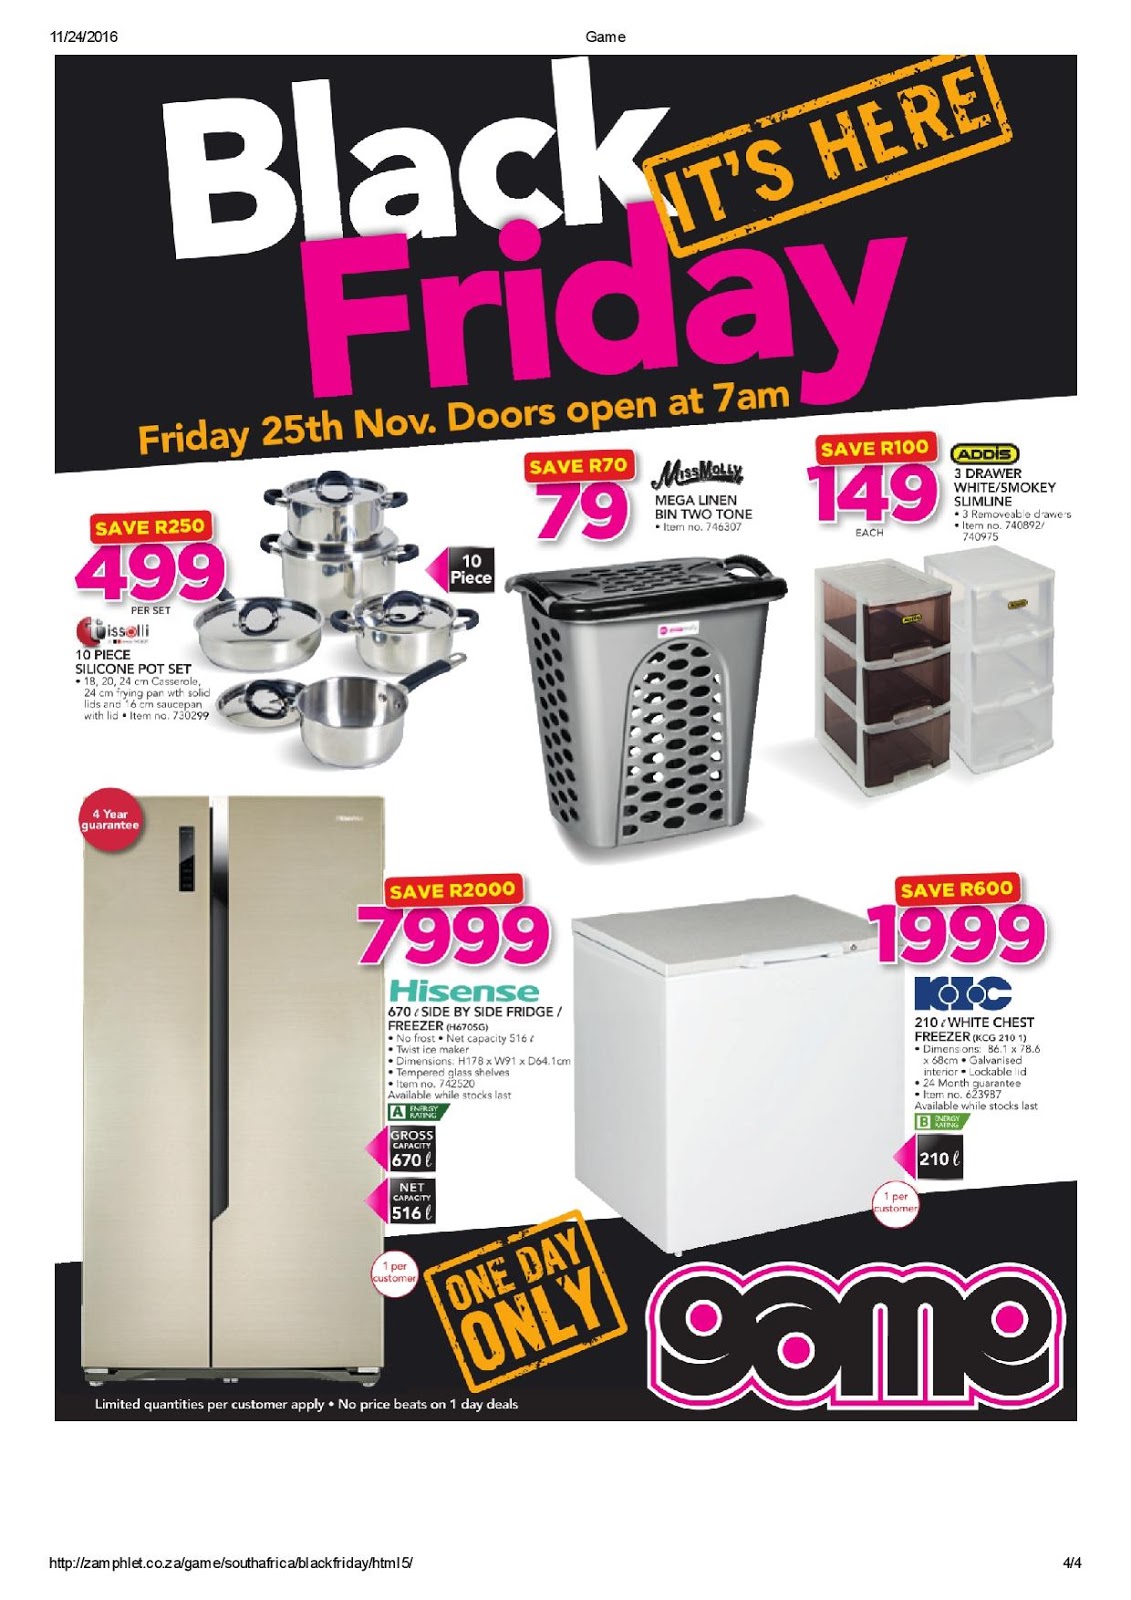 #BlackFriday Game Best Black Friday Hot deals in South Africa - Online Scoops